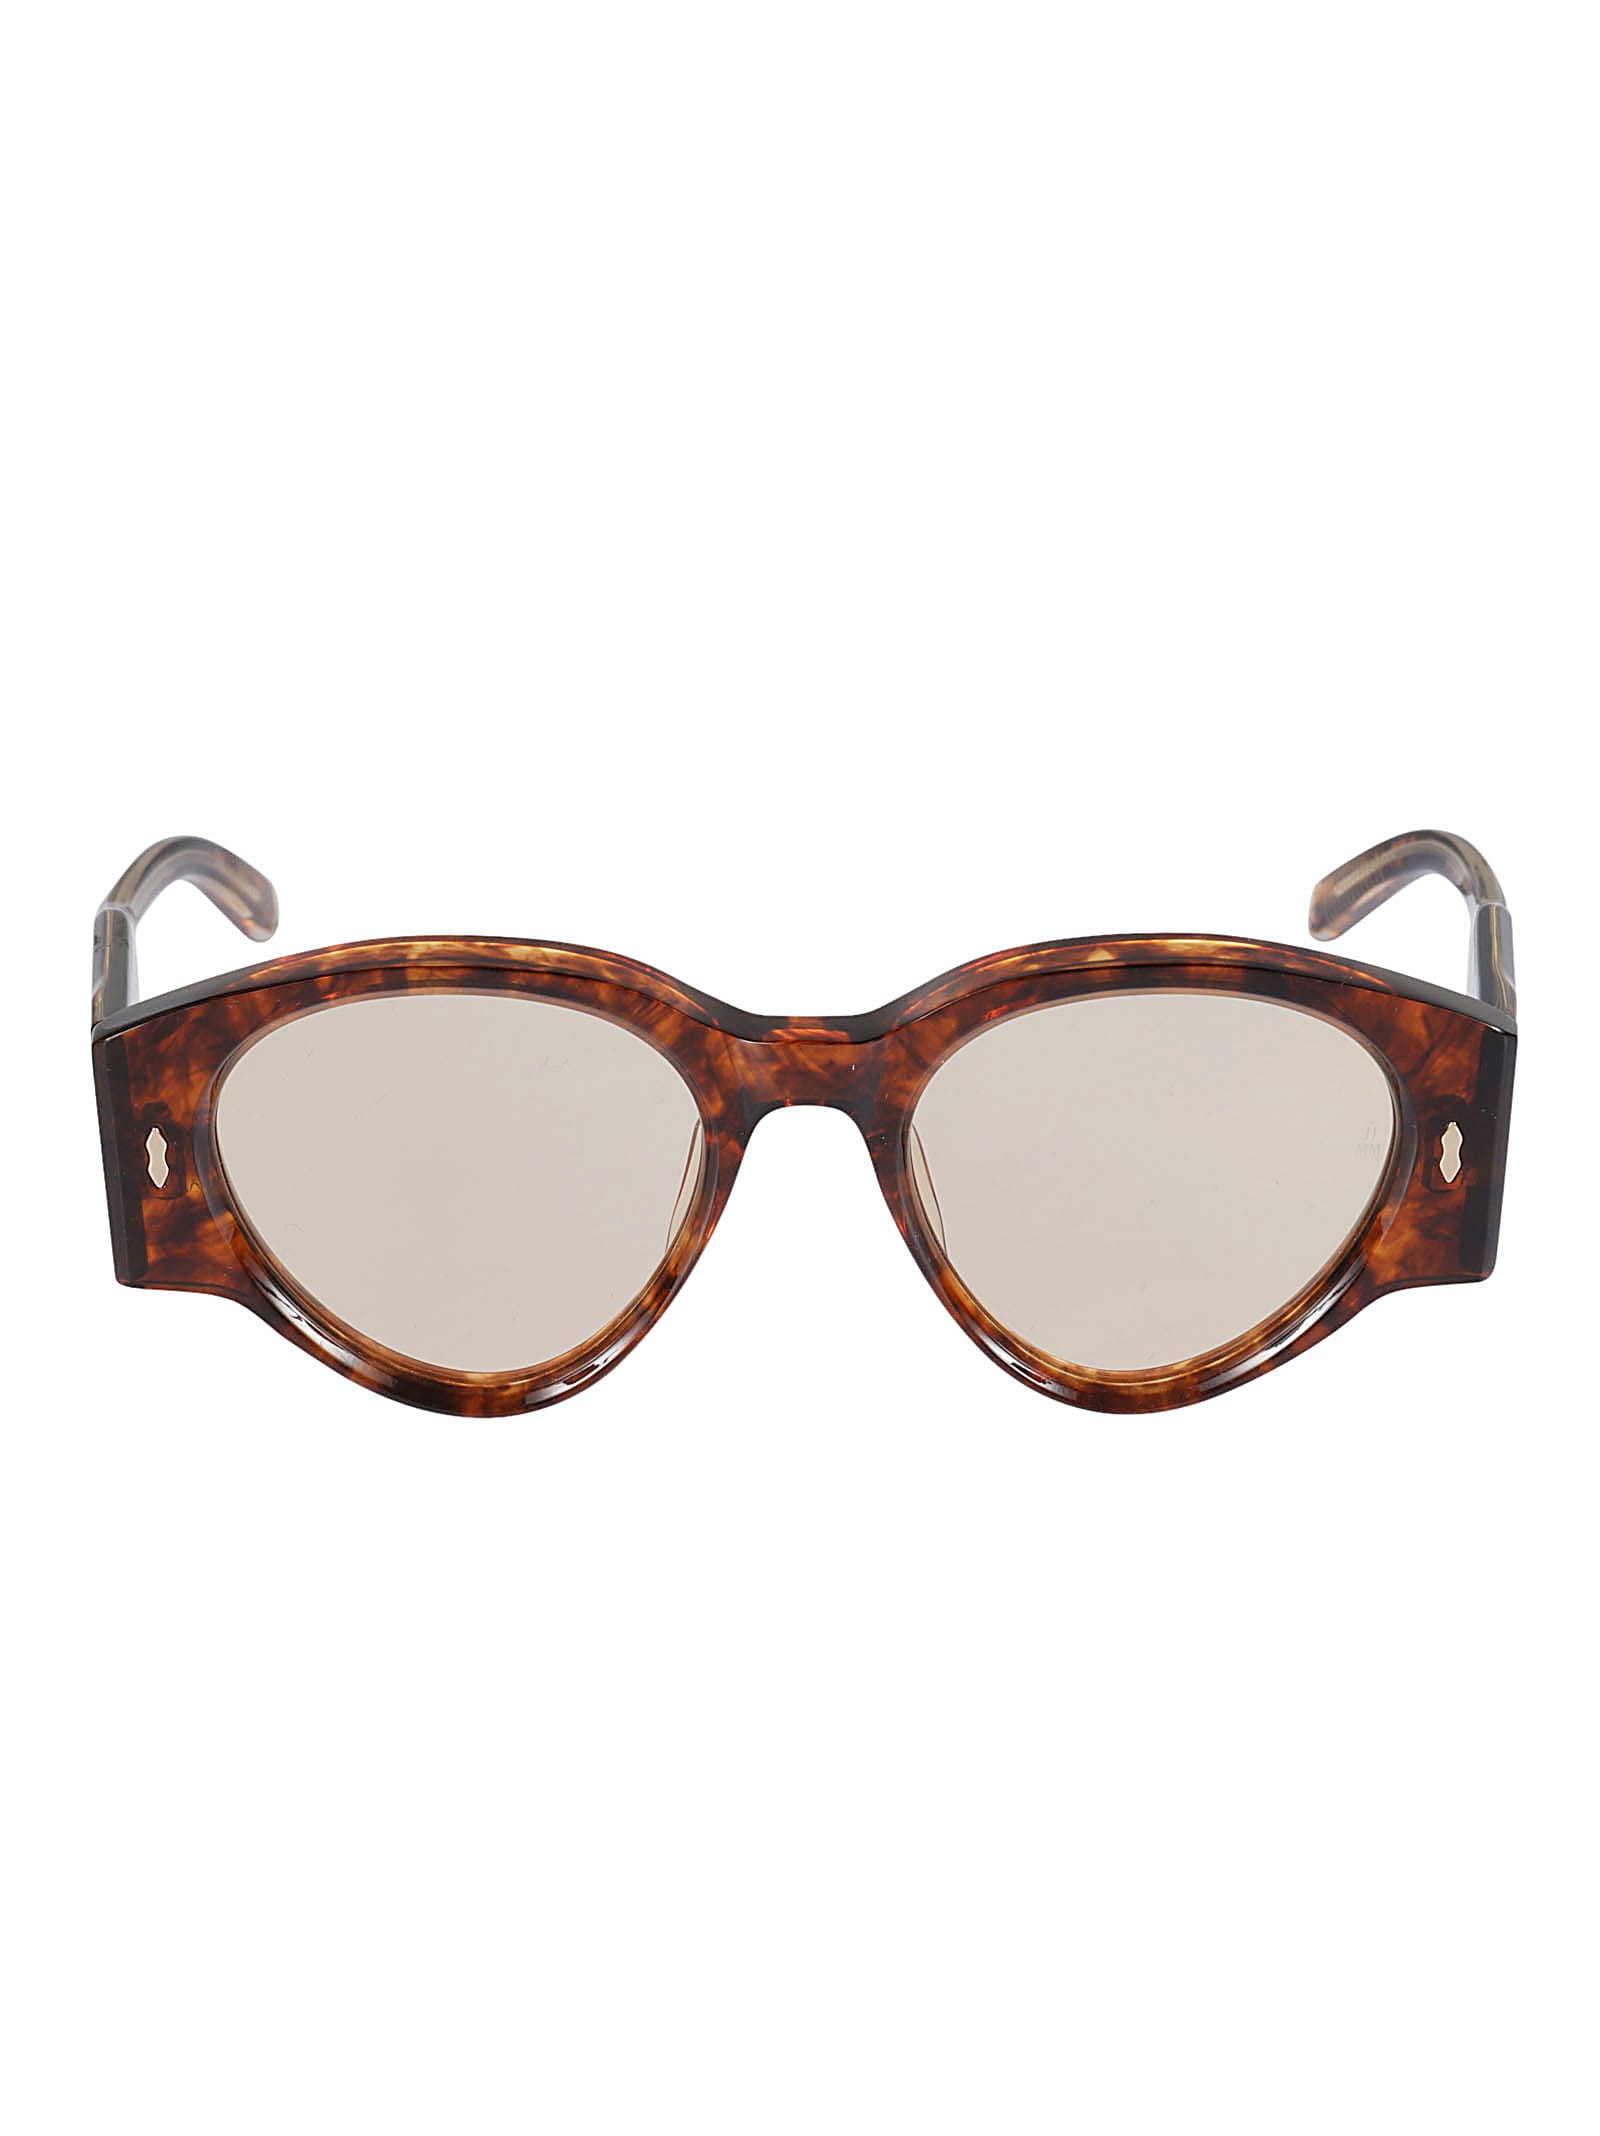 Jacques Marie Mage Lana Sunglasses In Argyle